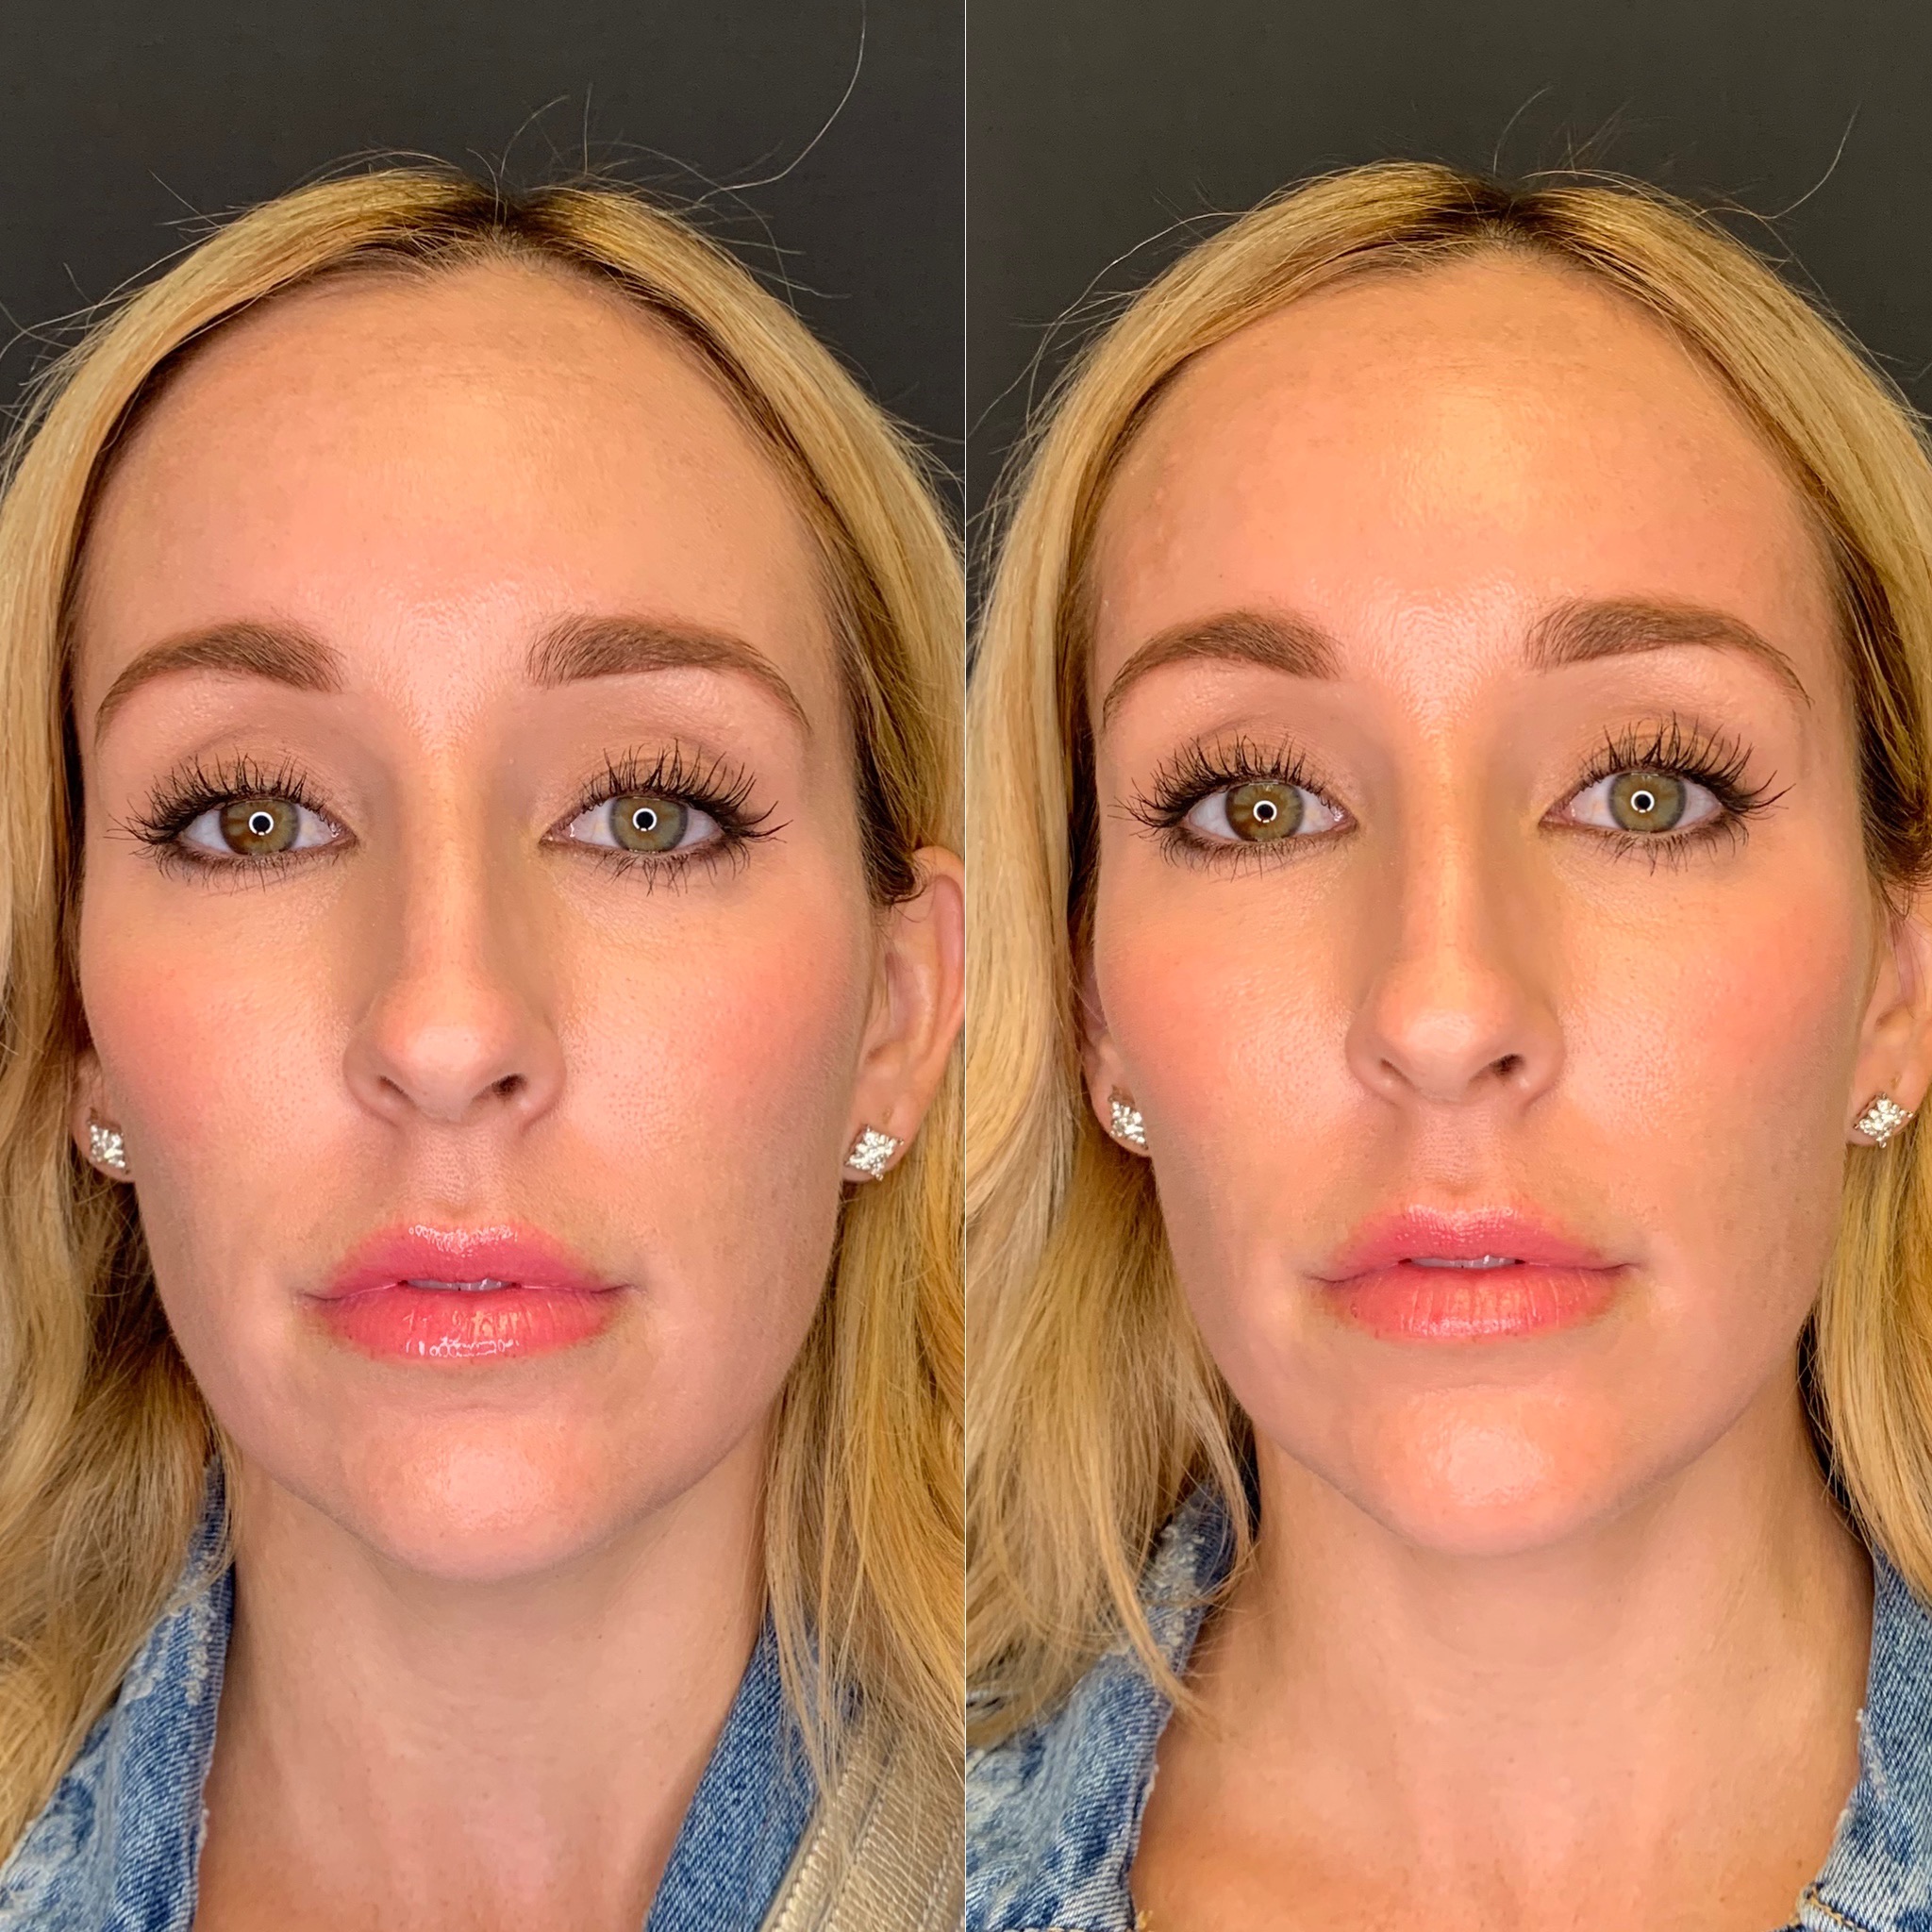 Before and After Temple Fillers Treatment | Beauty Boost Med Spa in Newport Beach, CA